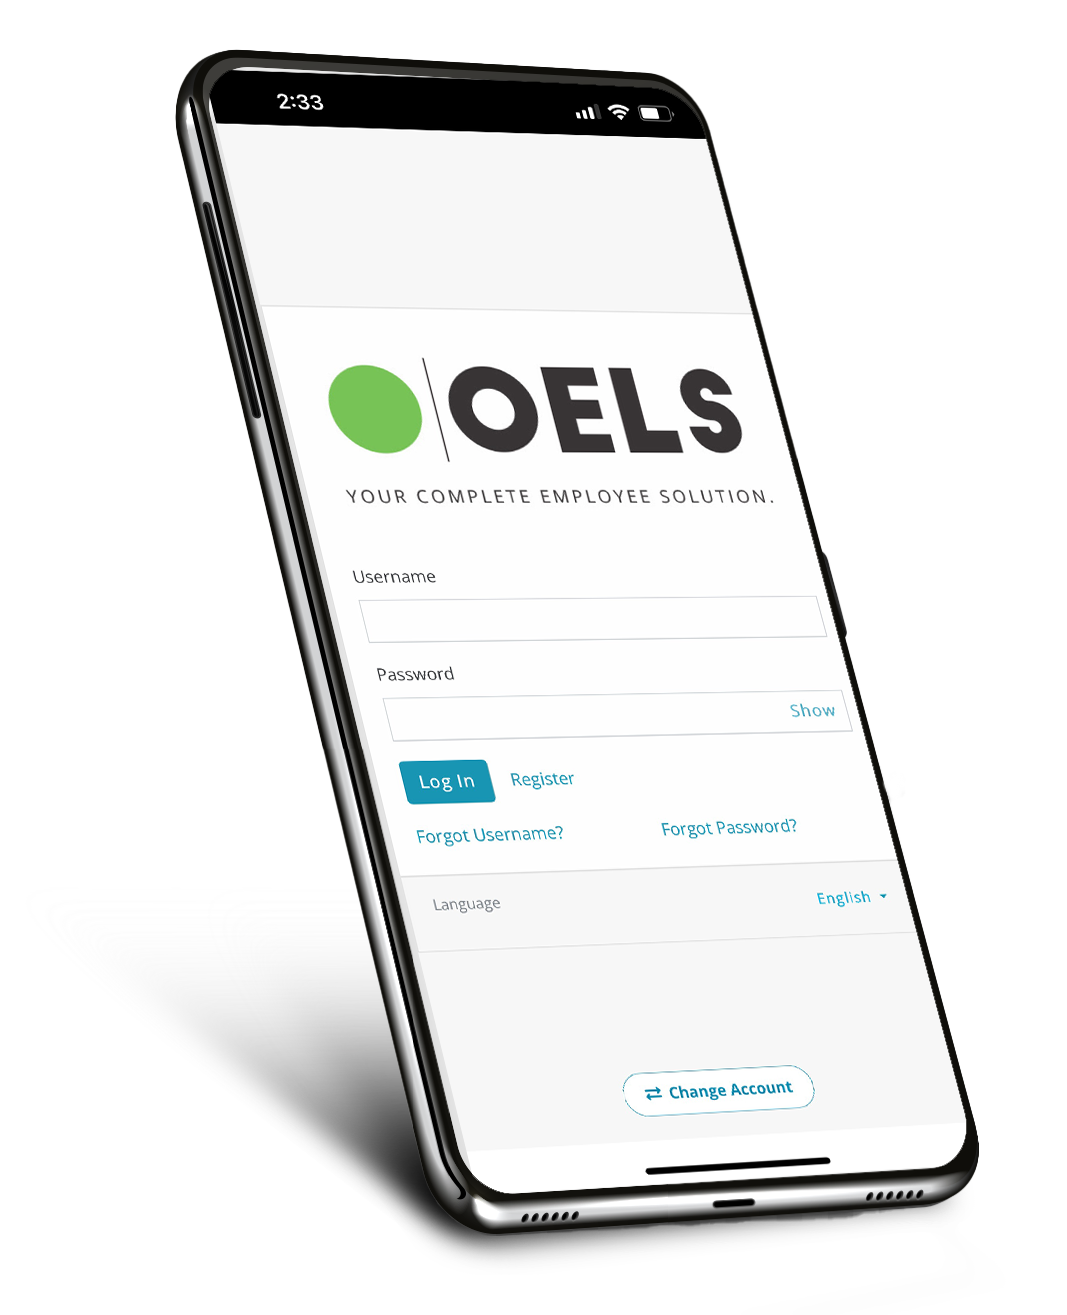 Download Our New OELS Mobile App